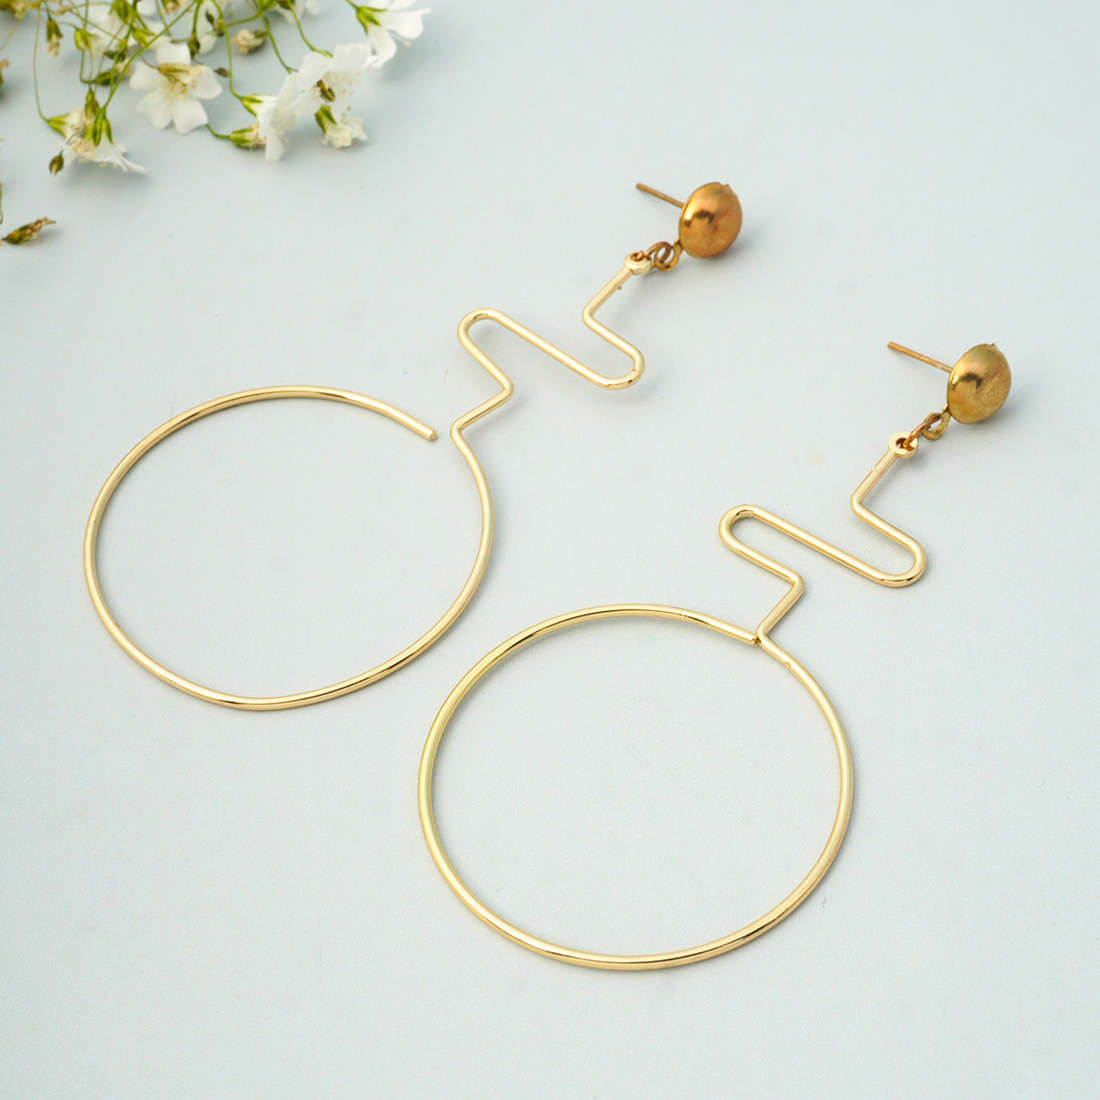 Gold Twisted Ring Danglers
